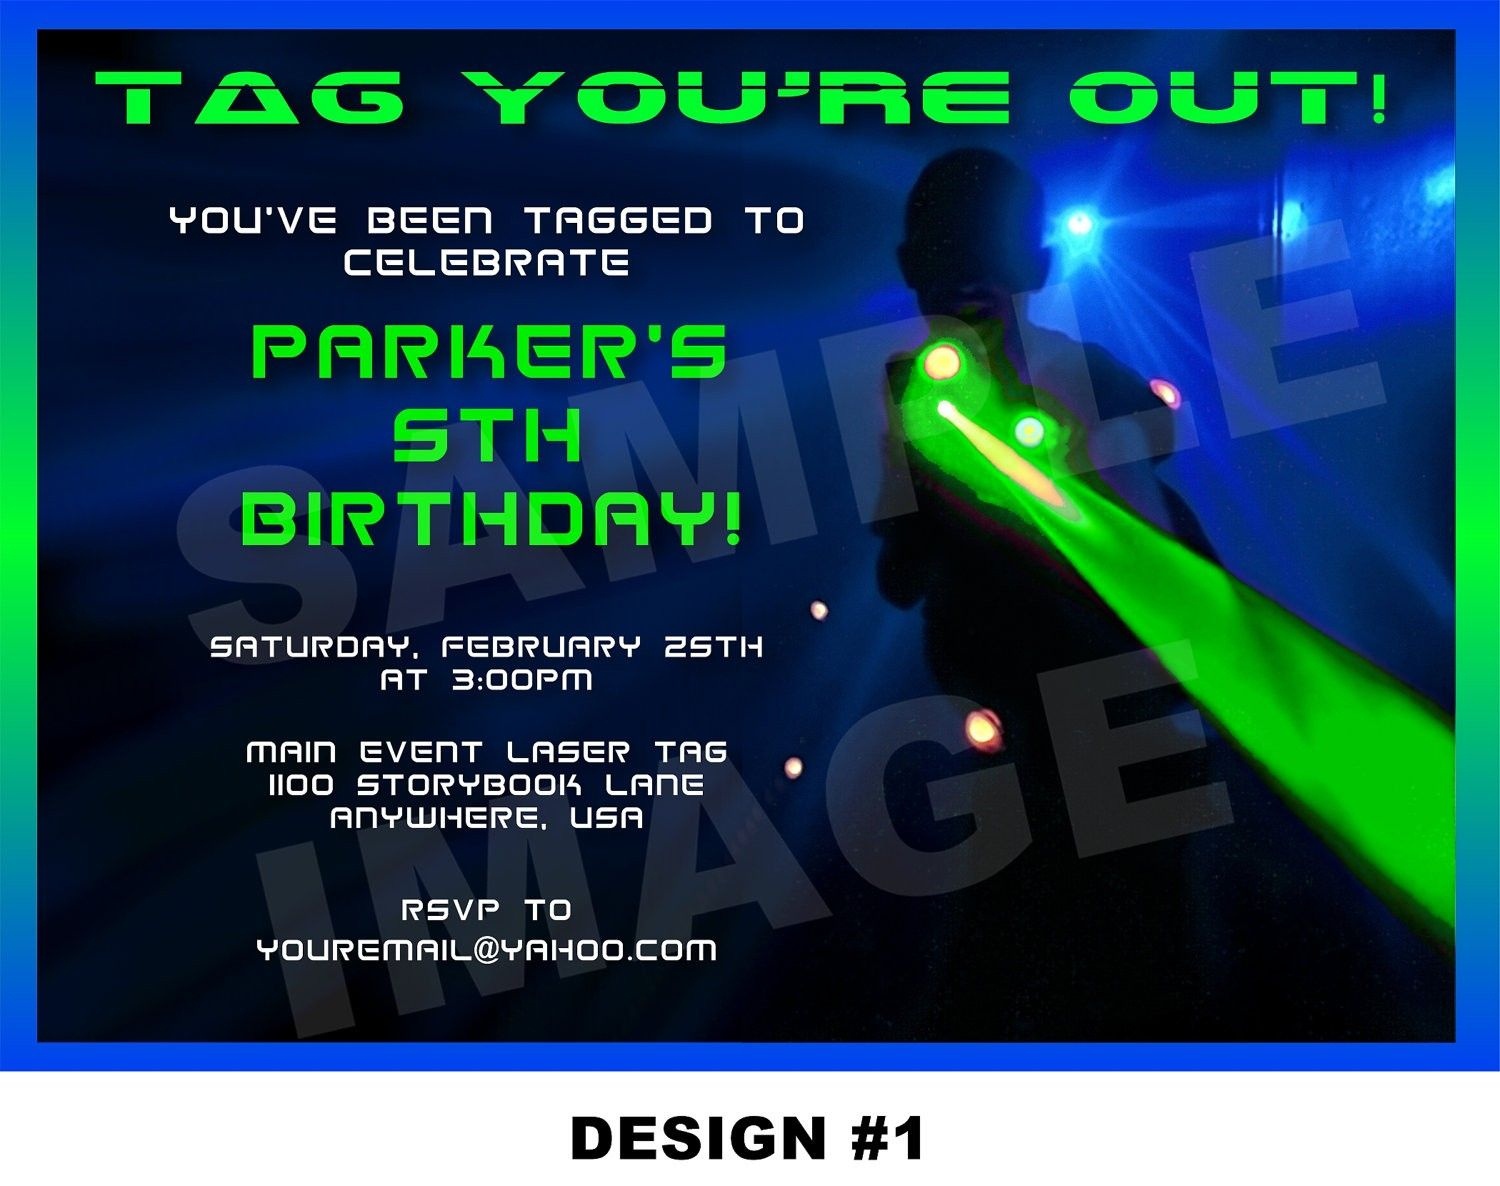 Laser Tag Party Invitations Template Free | Nicks Birthday In 2019 - Free Printable Laser Tag Invitation Template